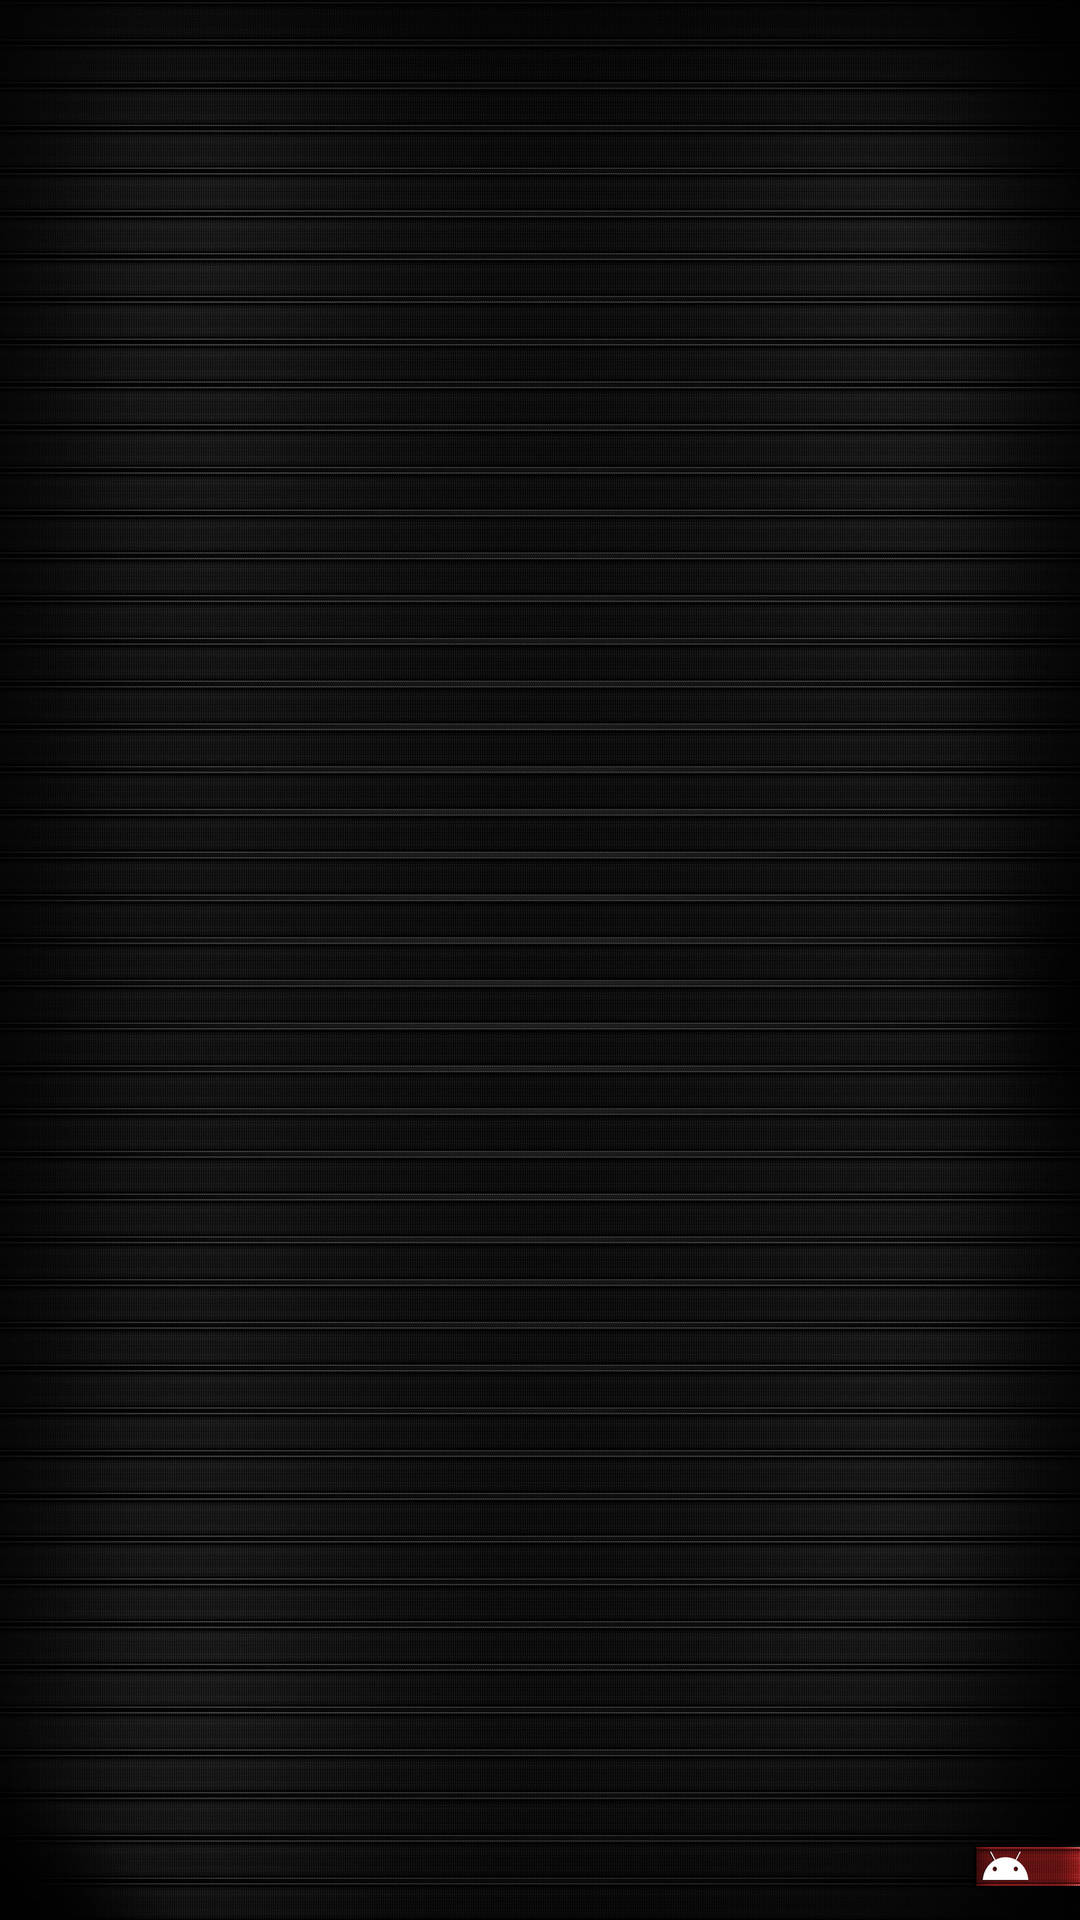 Dark Android Sophisticated Design Background